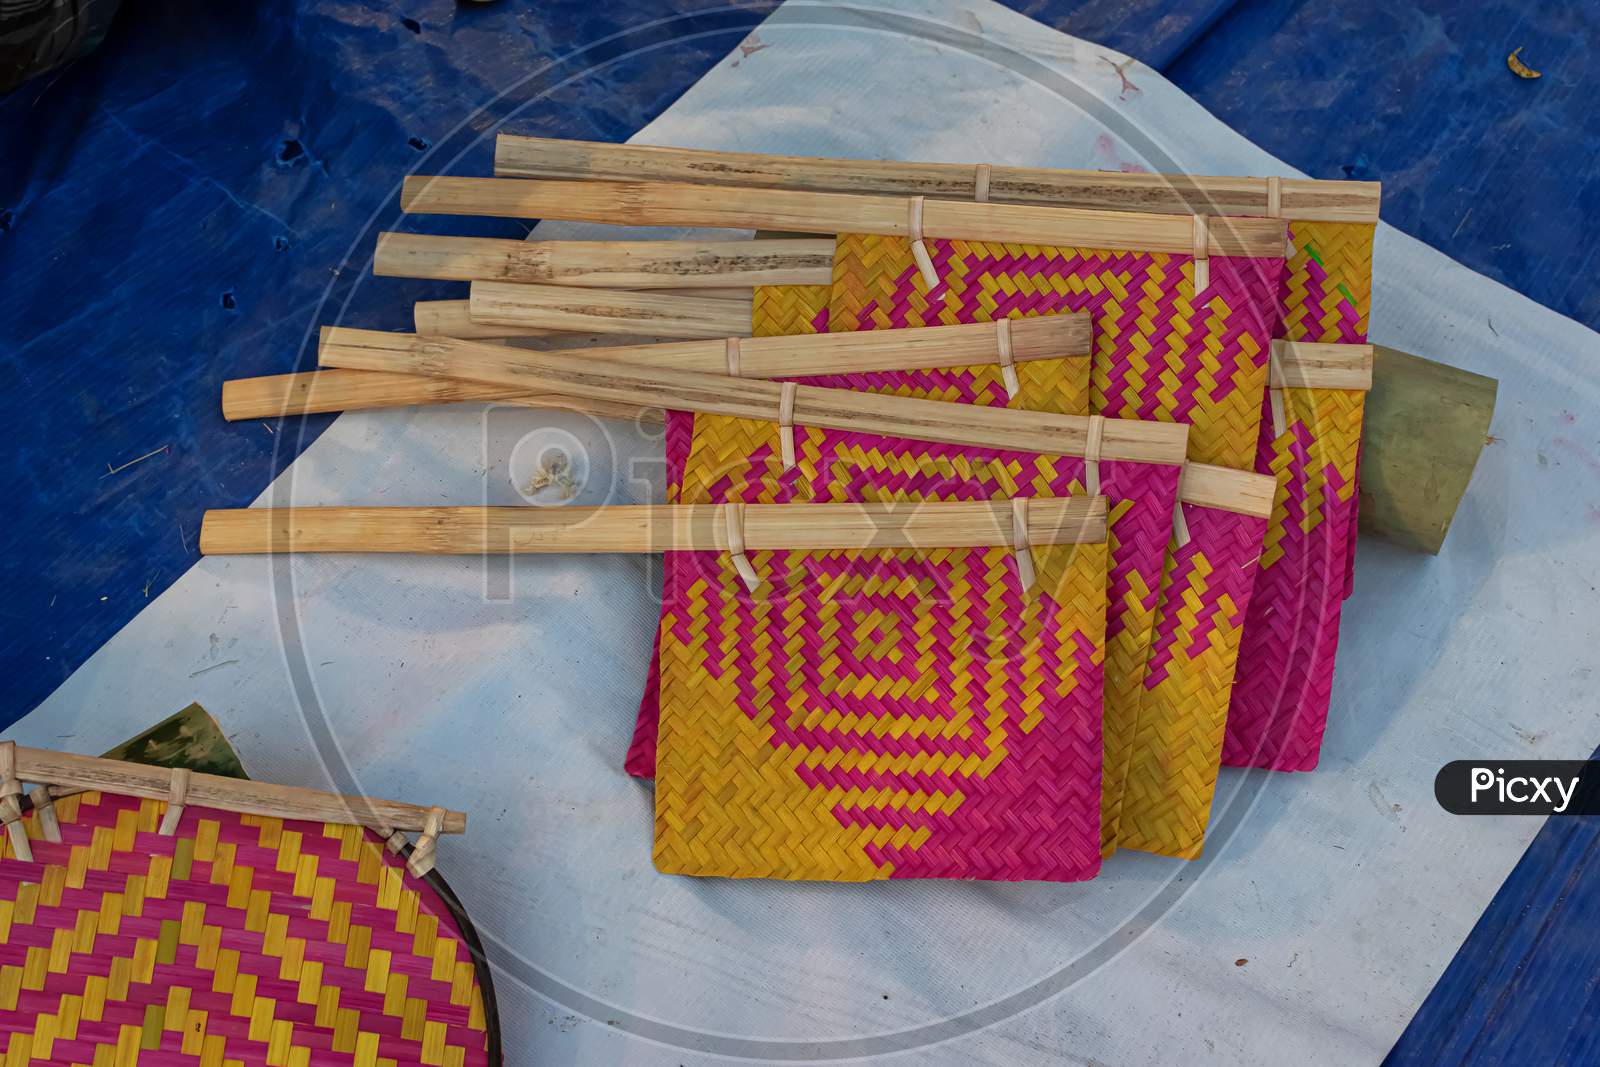 Beautiful Handmade Hand Fan Made By Bamboo Is Displayed In A Shop For Sale In Blurred Background. Indian Handicraft